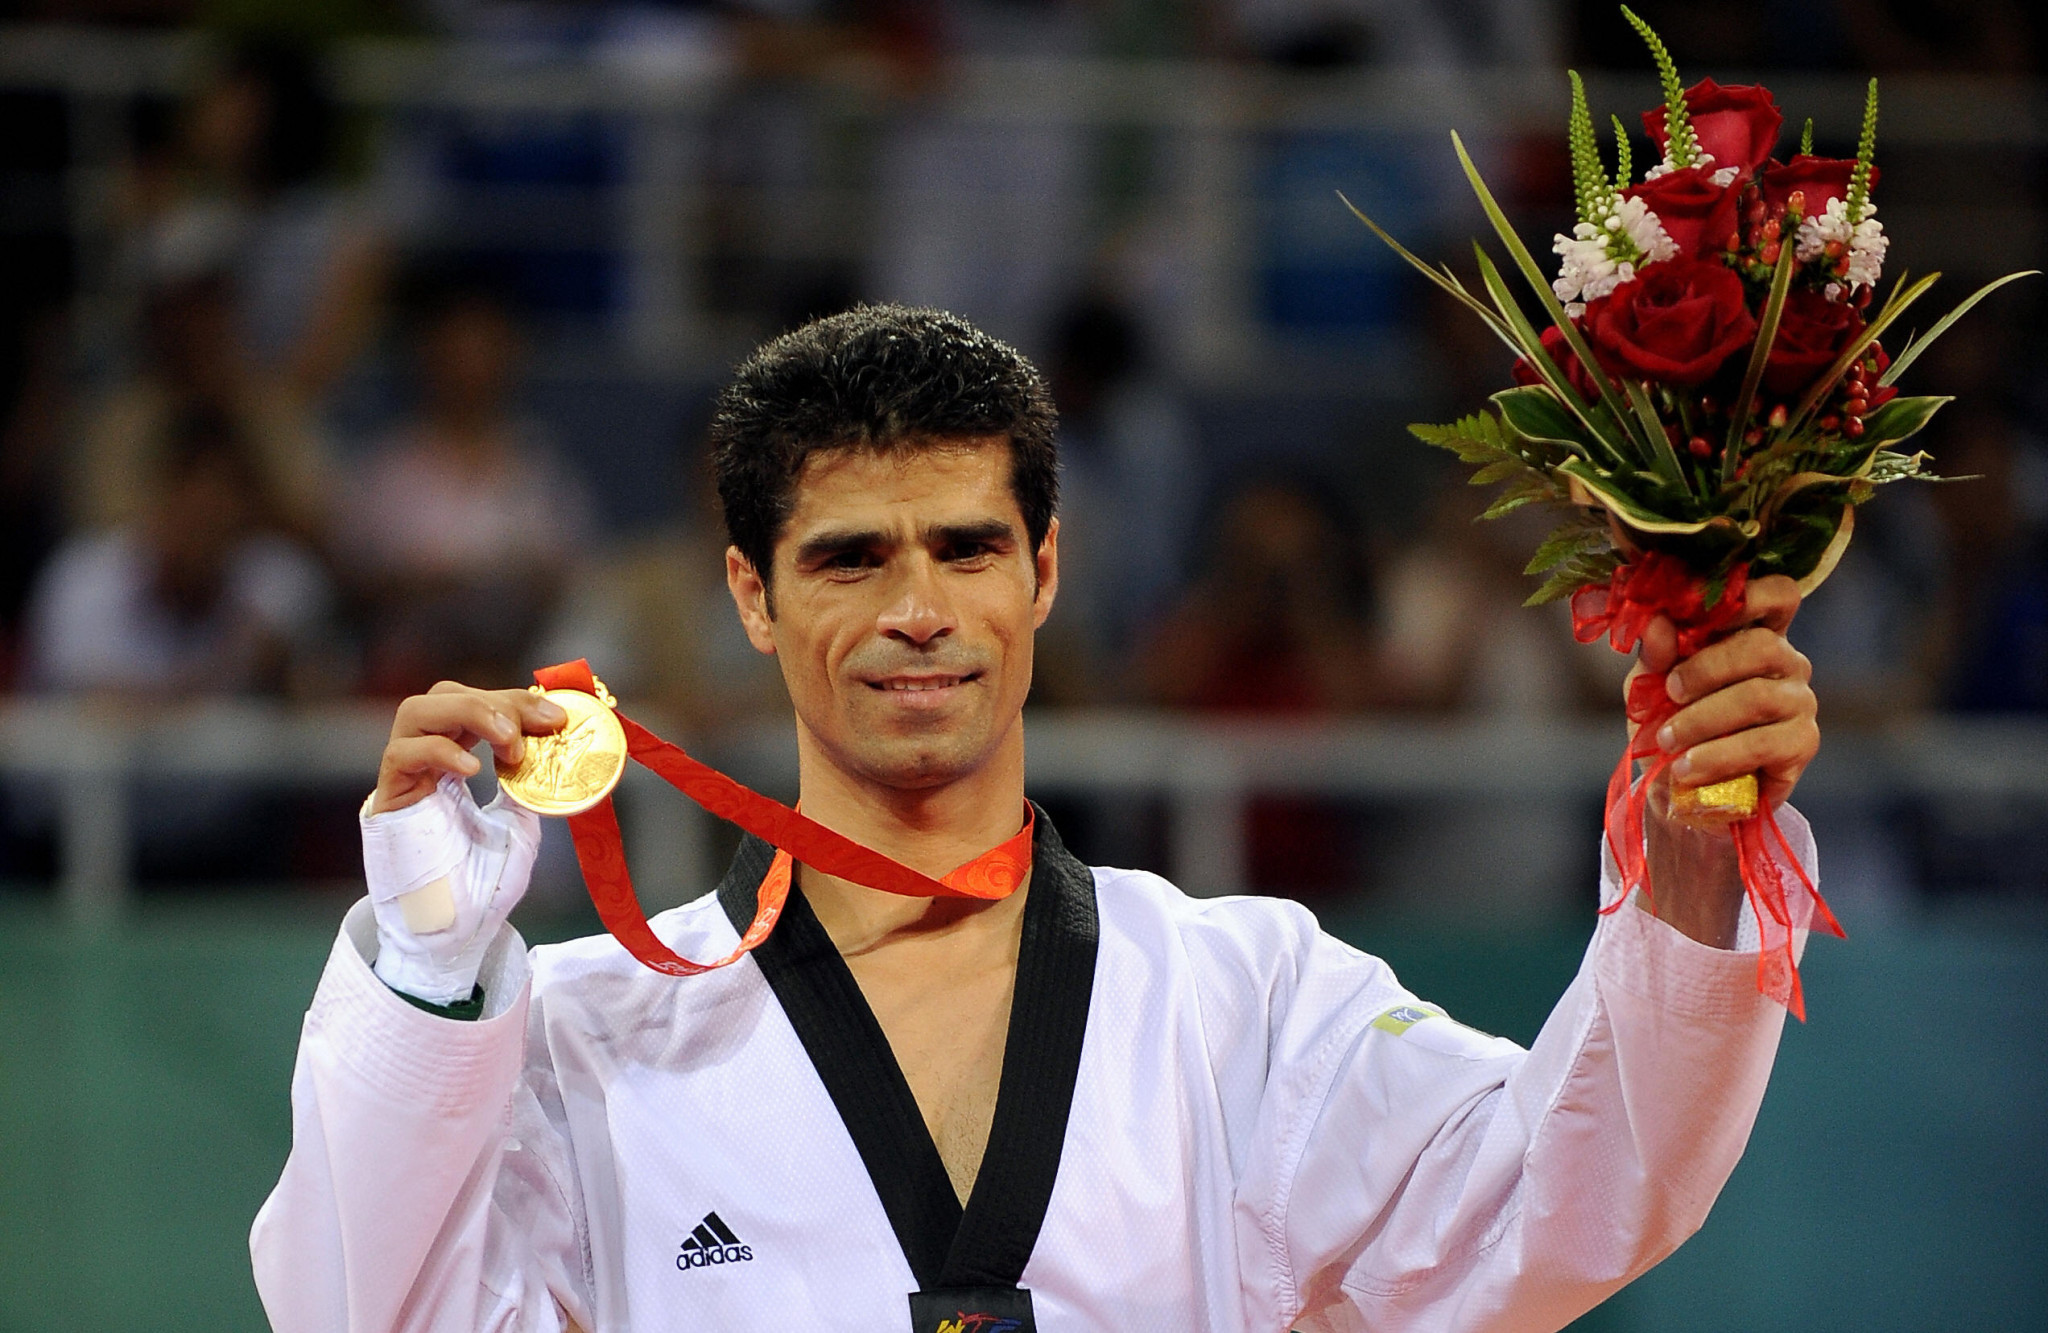 Hadi Saei won Olympic gold medals at Athens 2004 and Beijing 2008 ©Getty Images